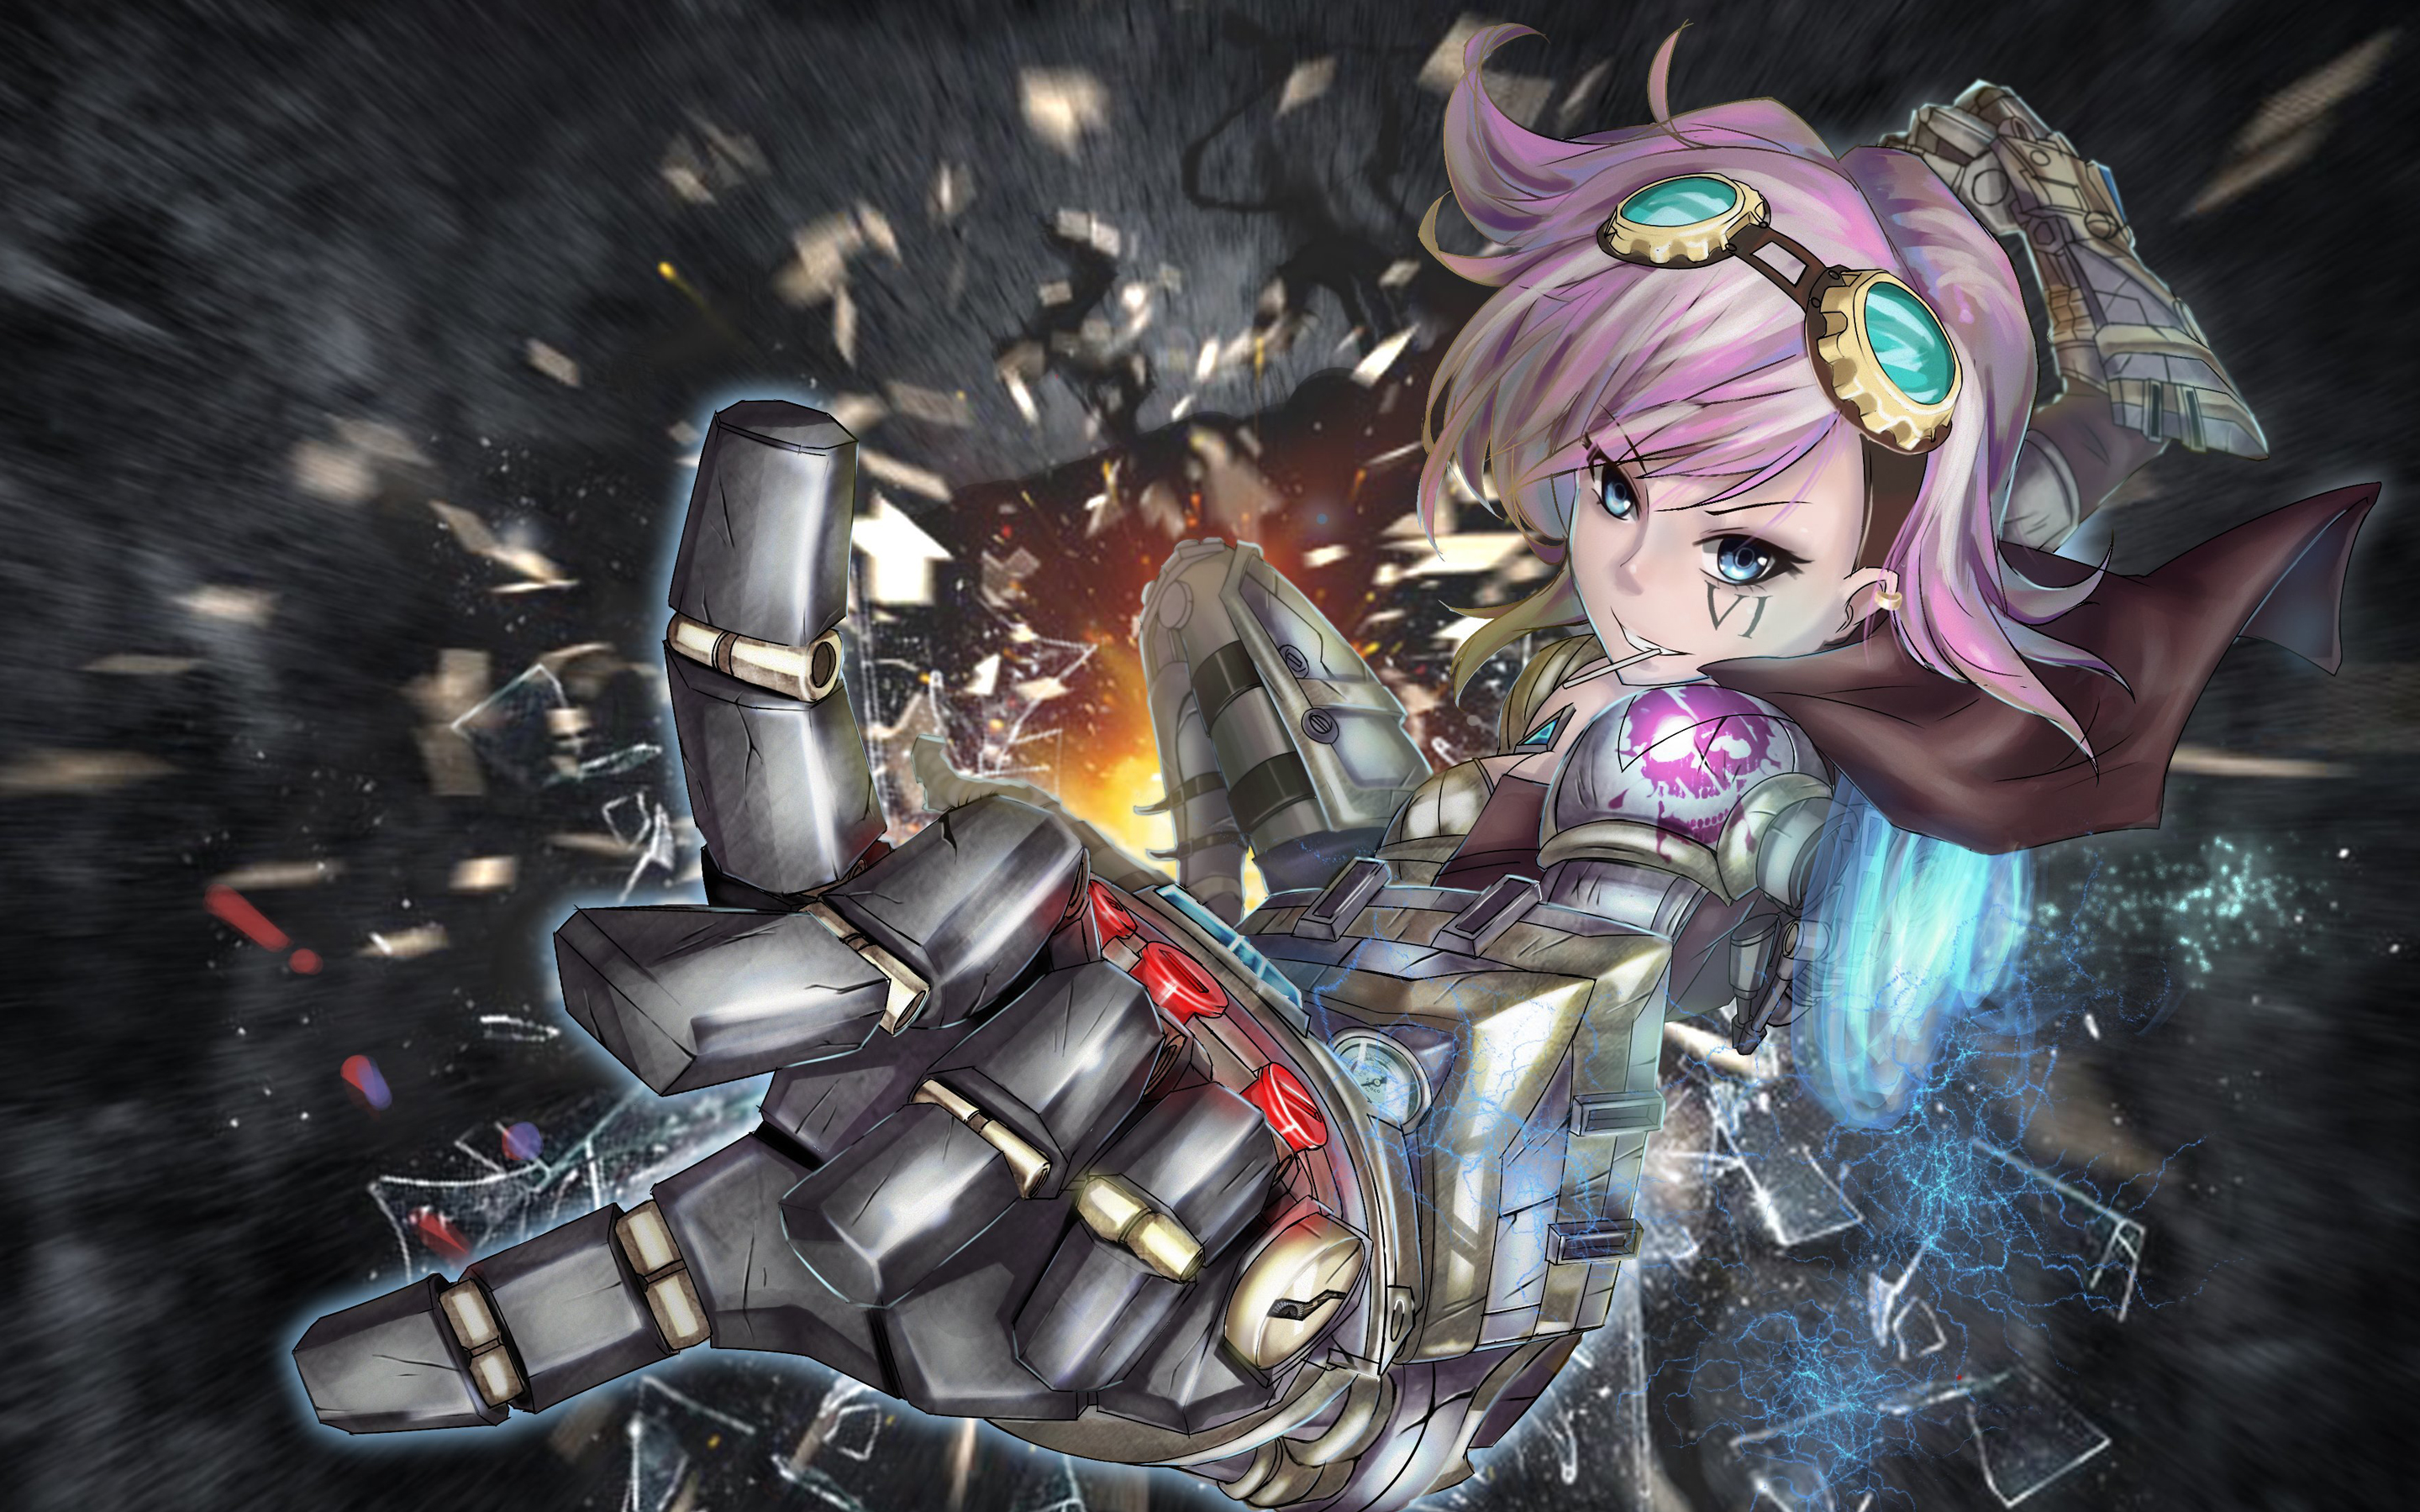 anime wallpaper hd,cg artwork,games,action adventure game,illustration,fictional character